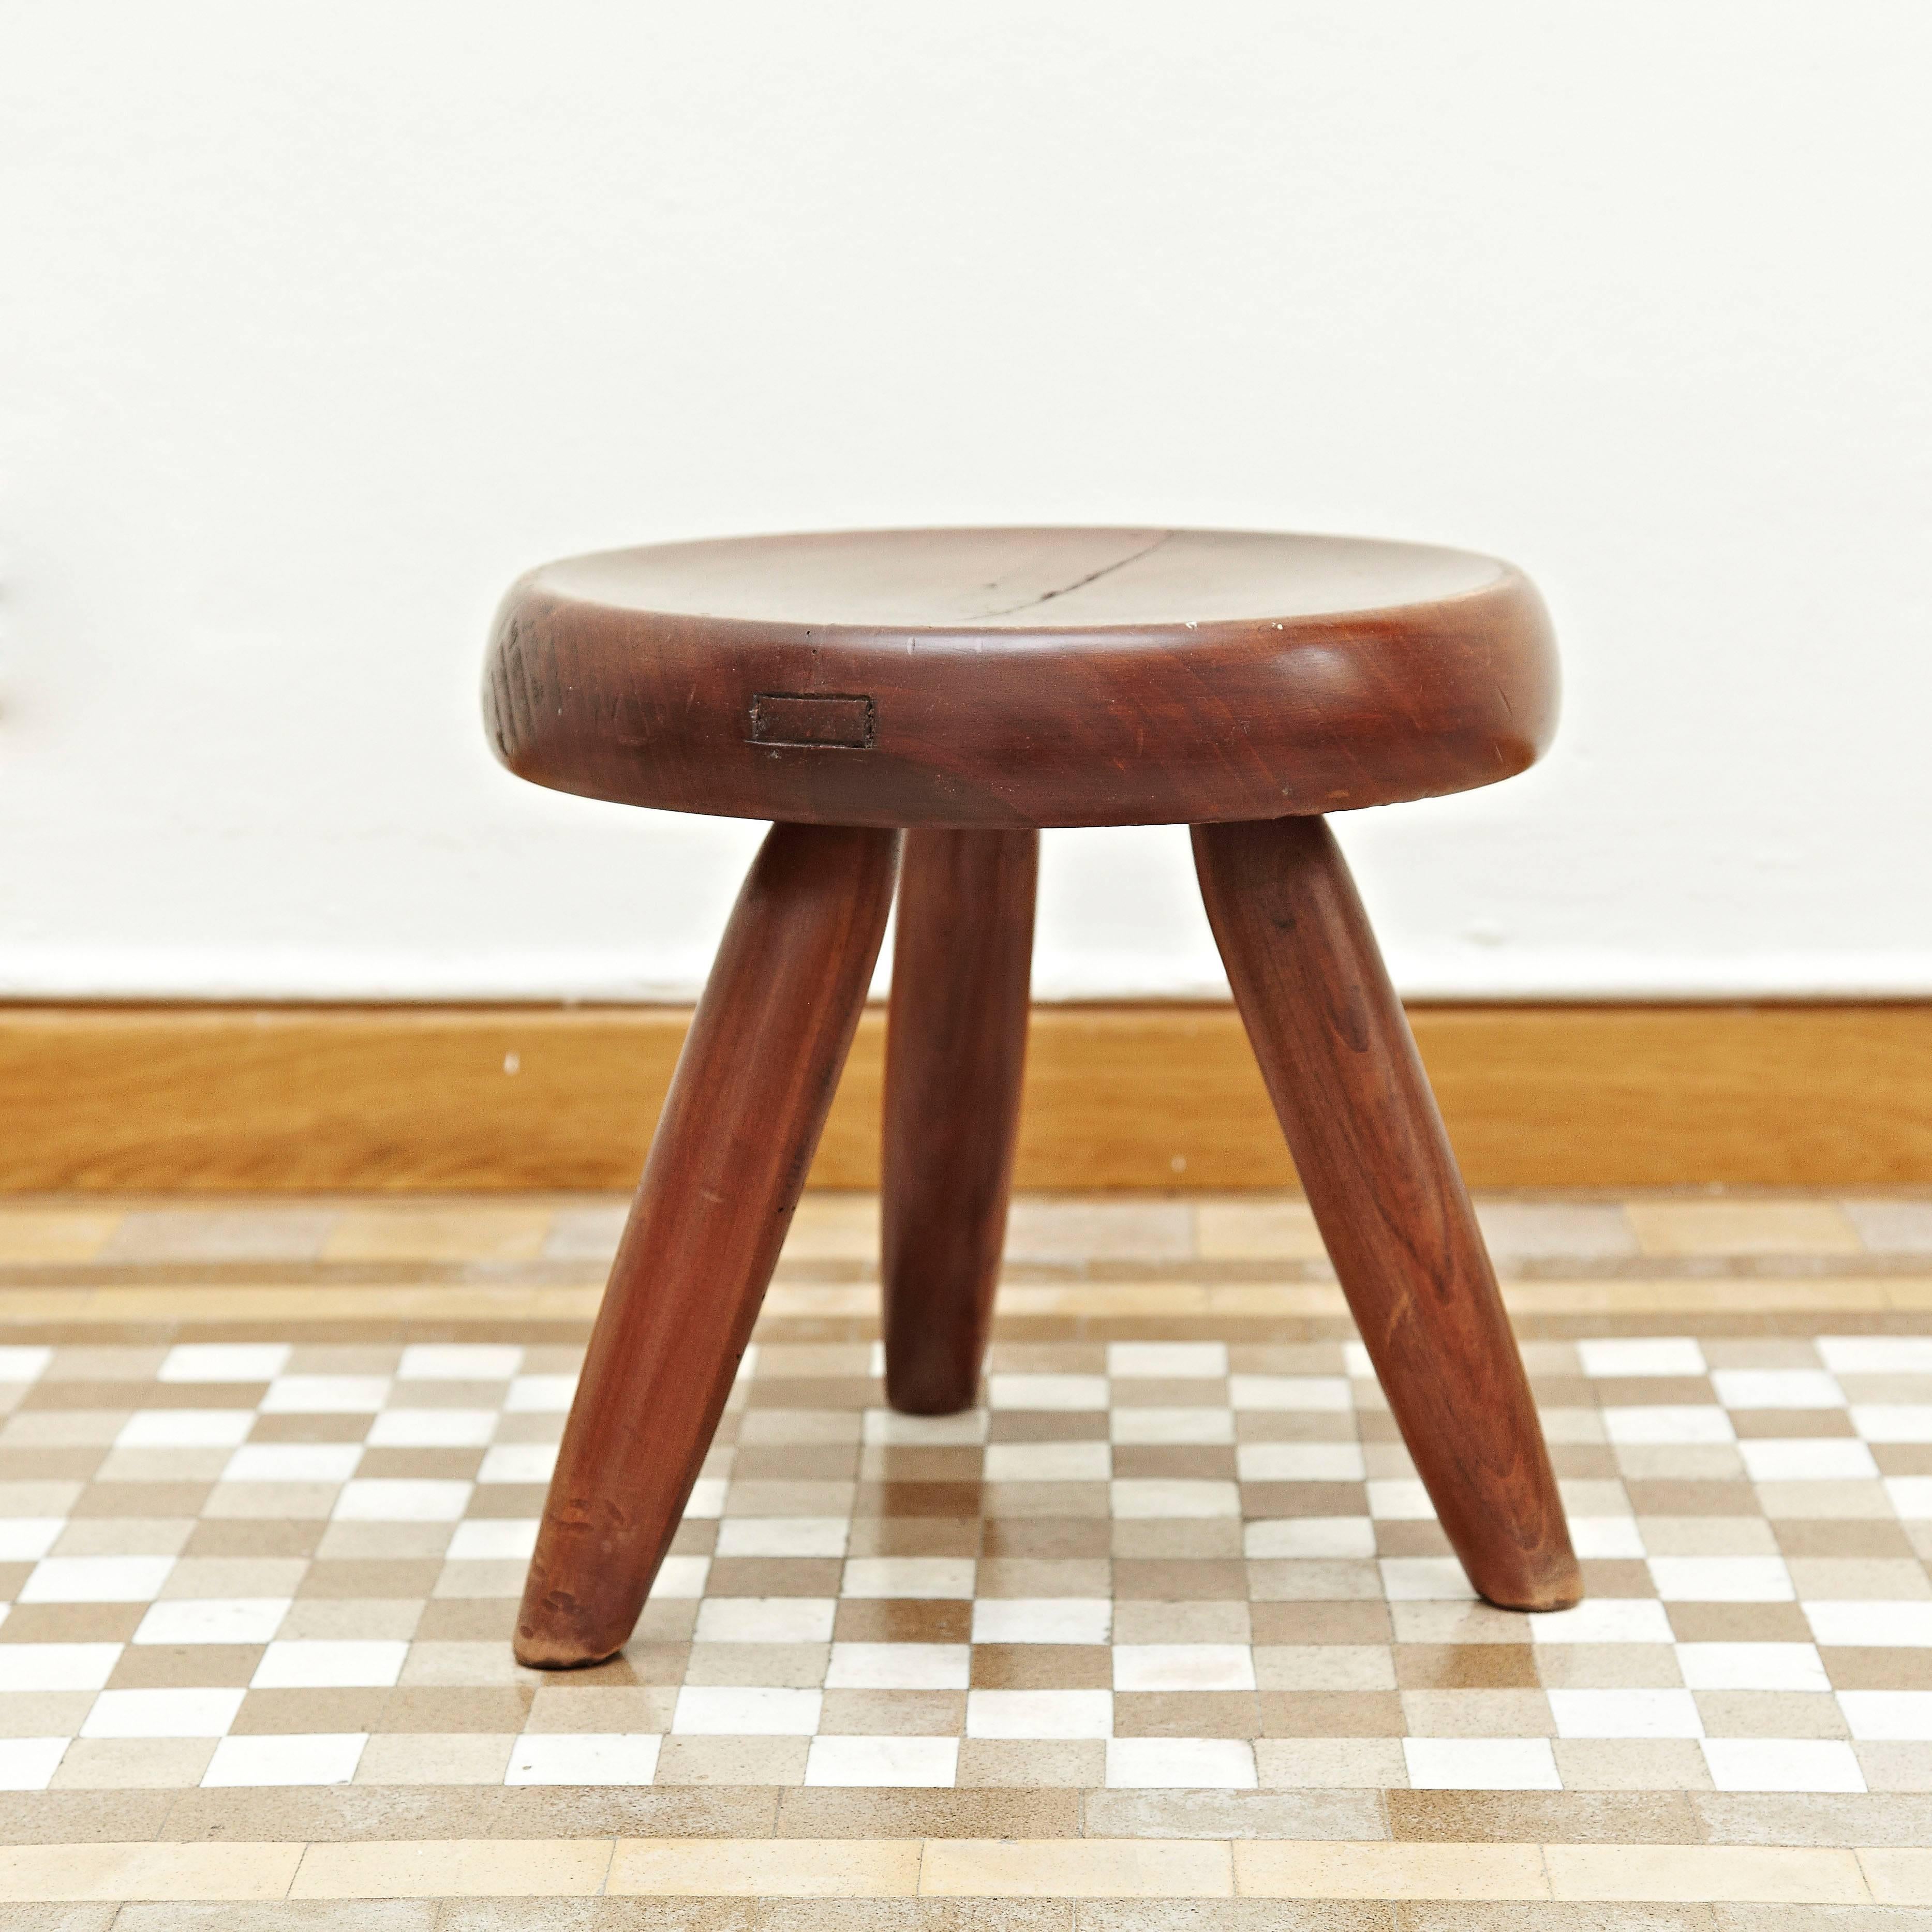 Stool designed by Charlotte Perriand around 1950, manufactured in France.
Wood.

In good original condition, with minor wear consistent with age and use, preserving a beautiful patina.

Charlotte Perriand (1903 - 1999) She was born in Paris in